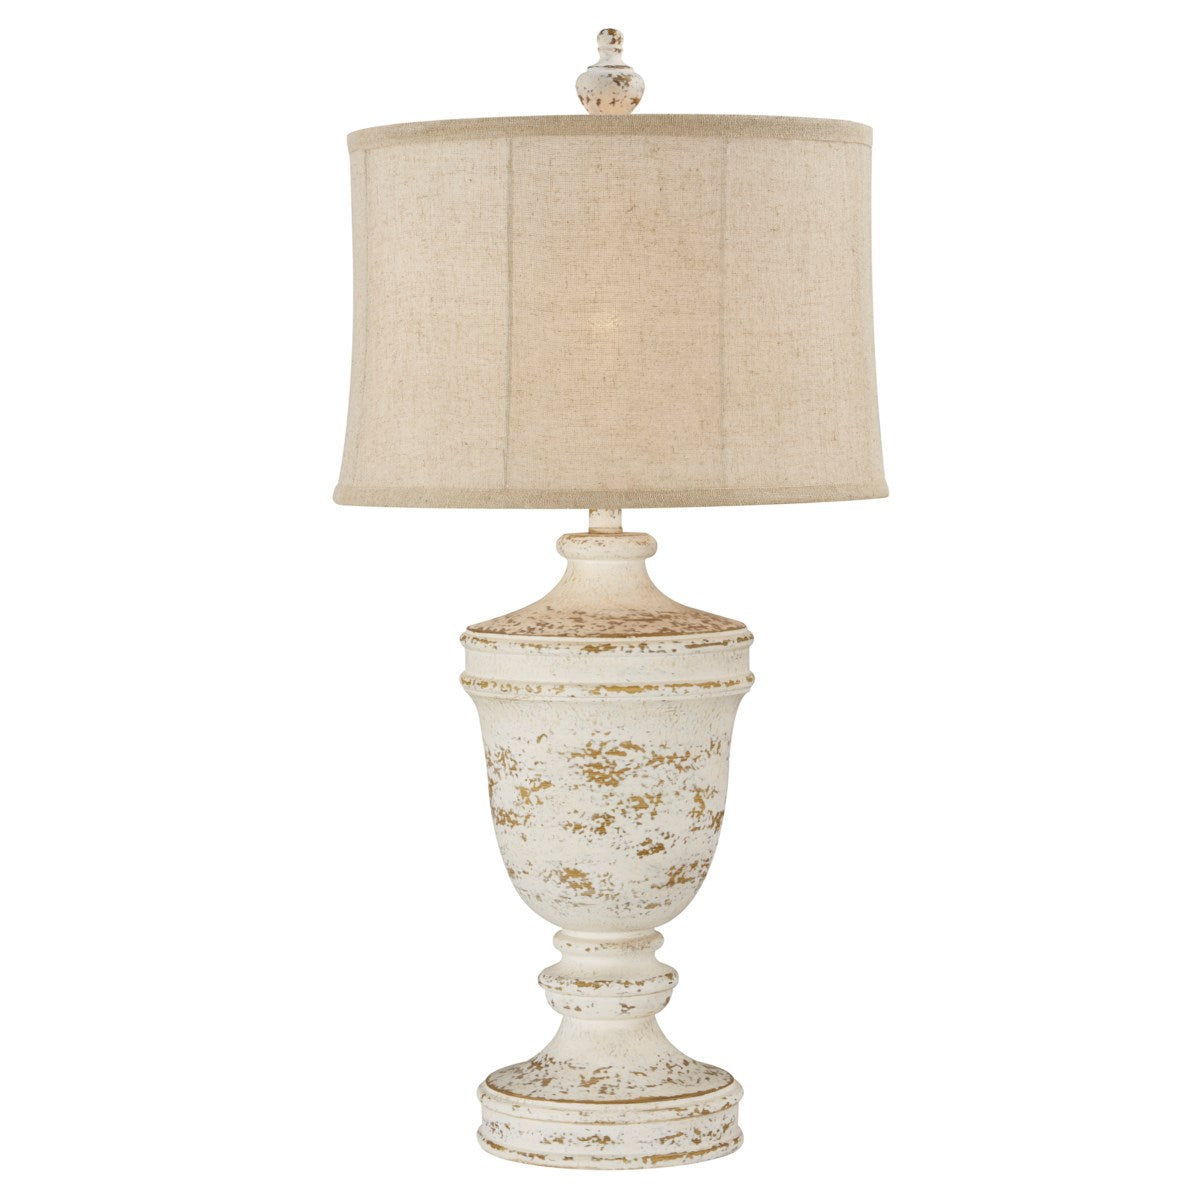 Christy Table Lamp